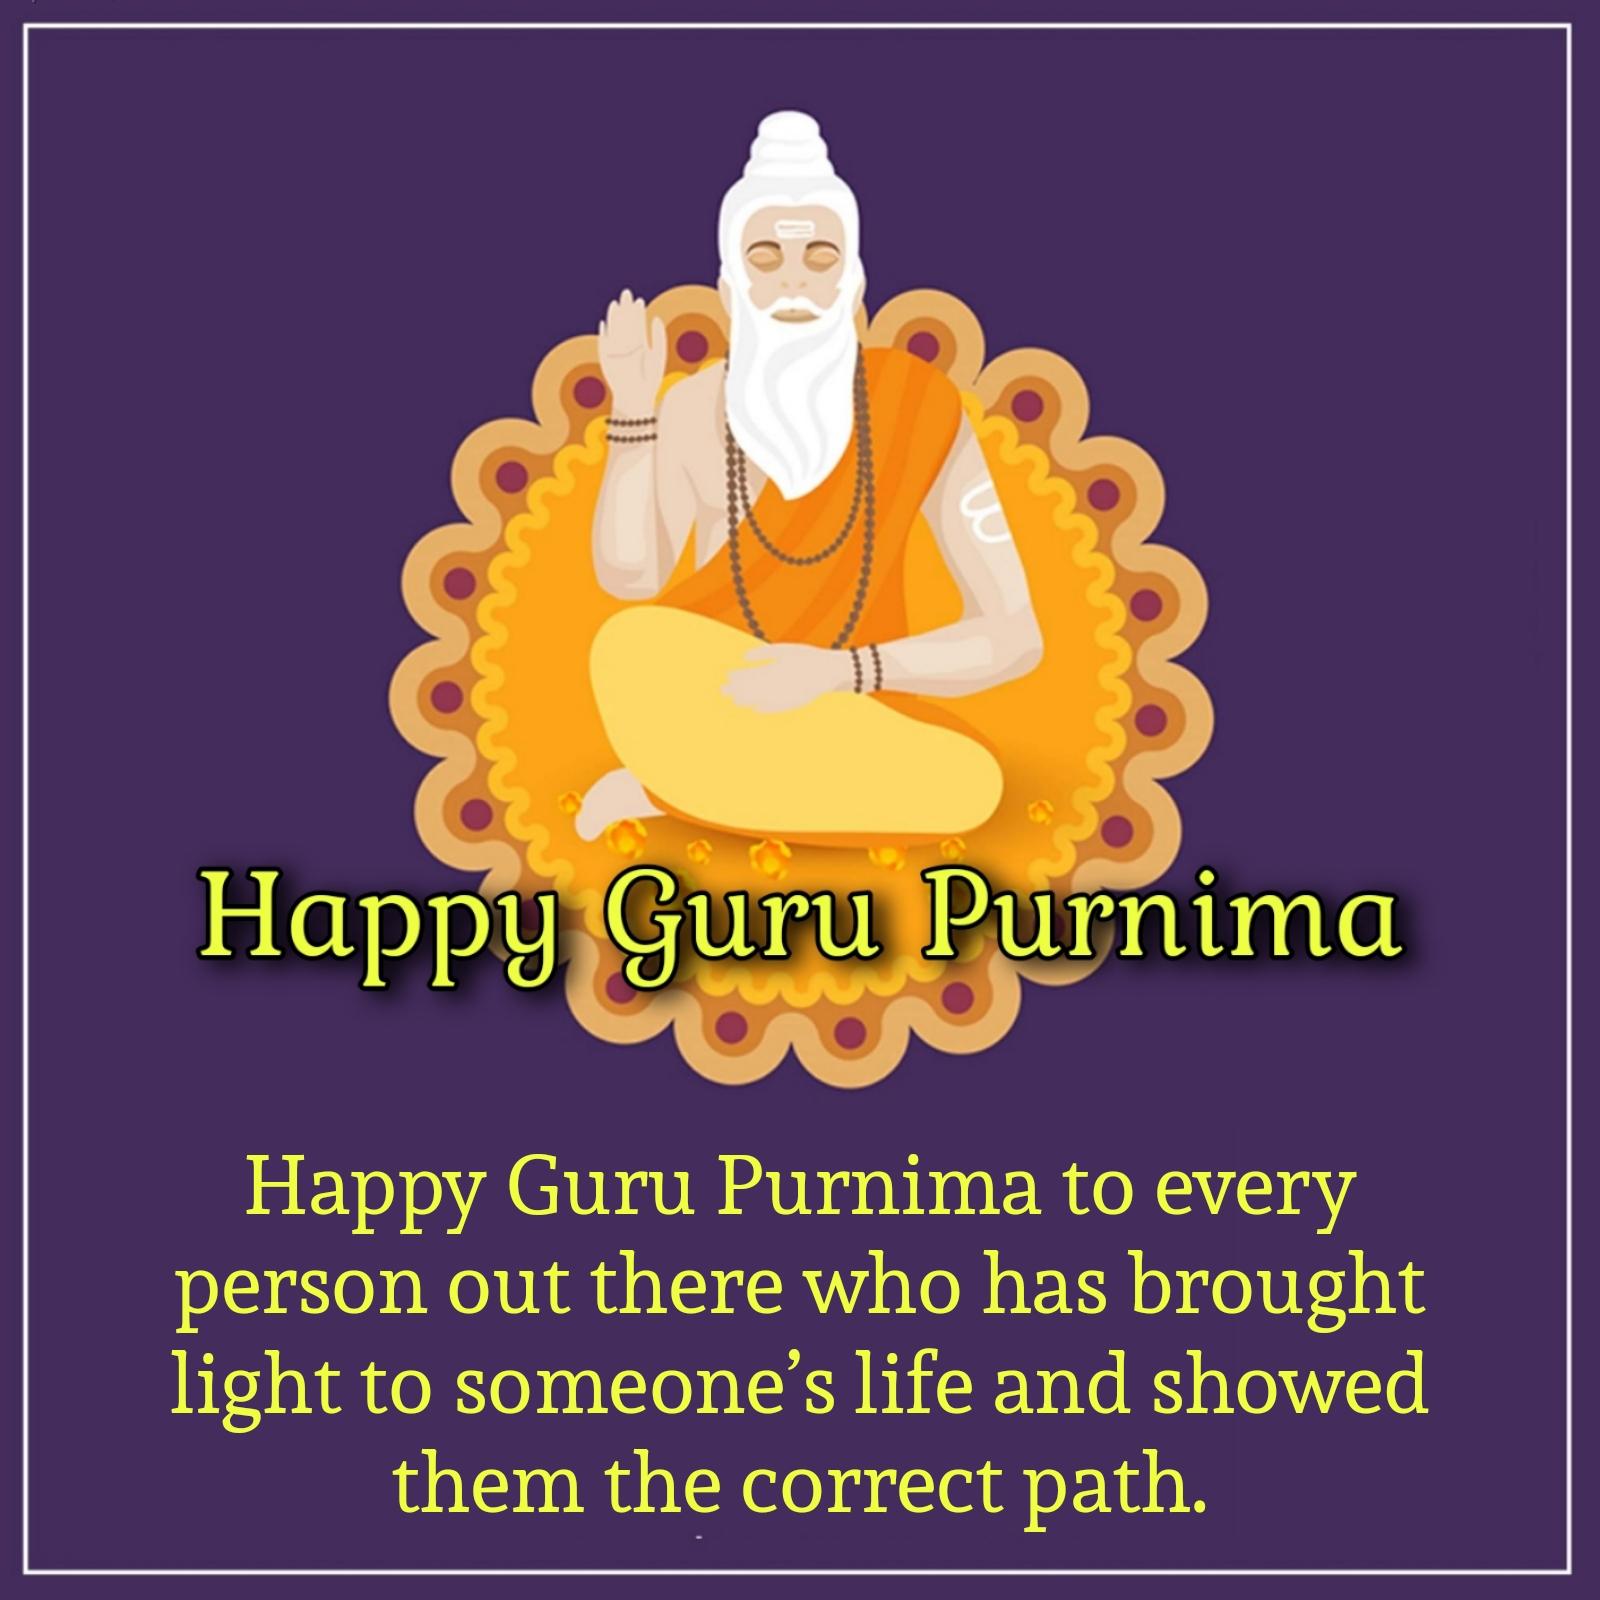 Happy Guru Purnima to every person out there who has brought light